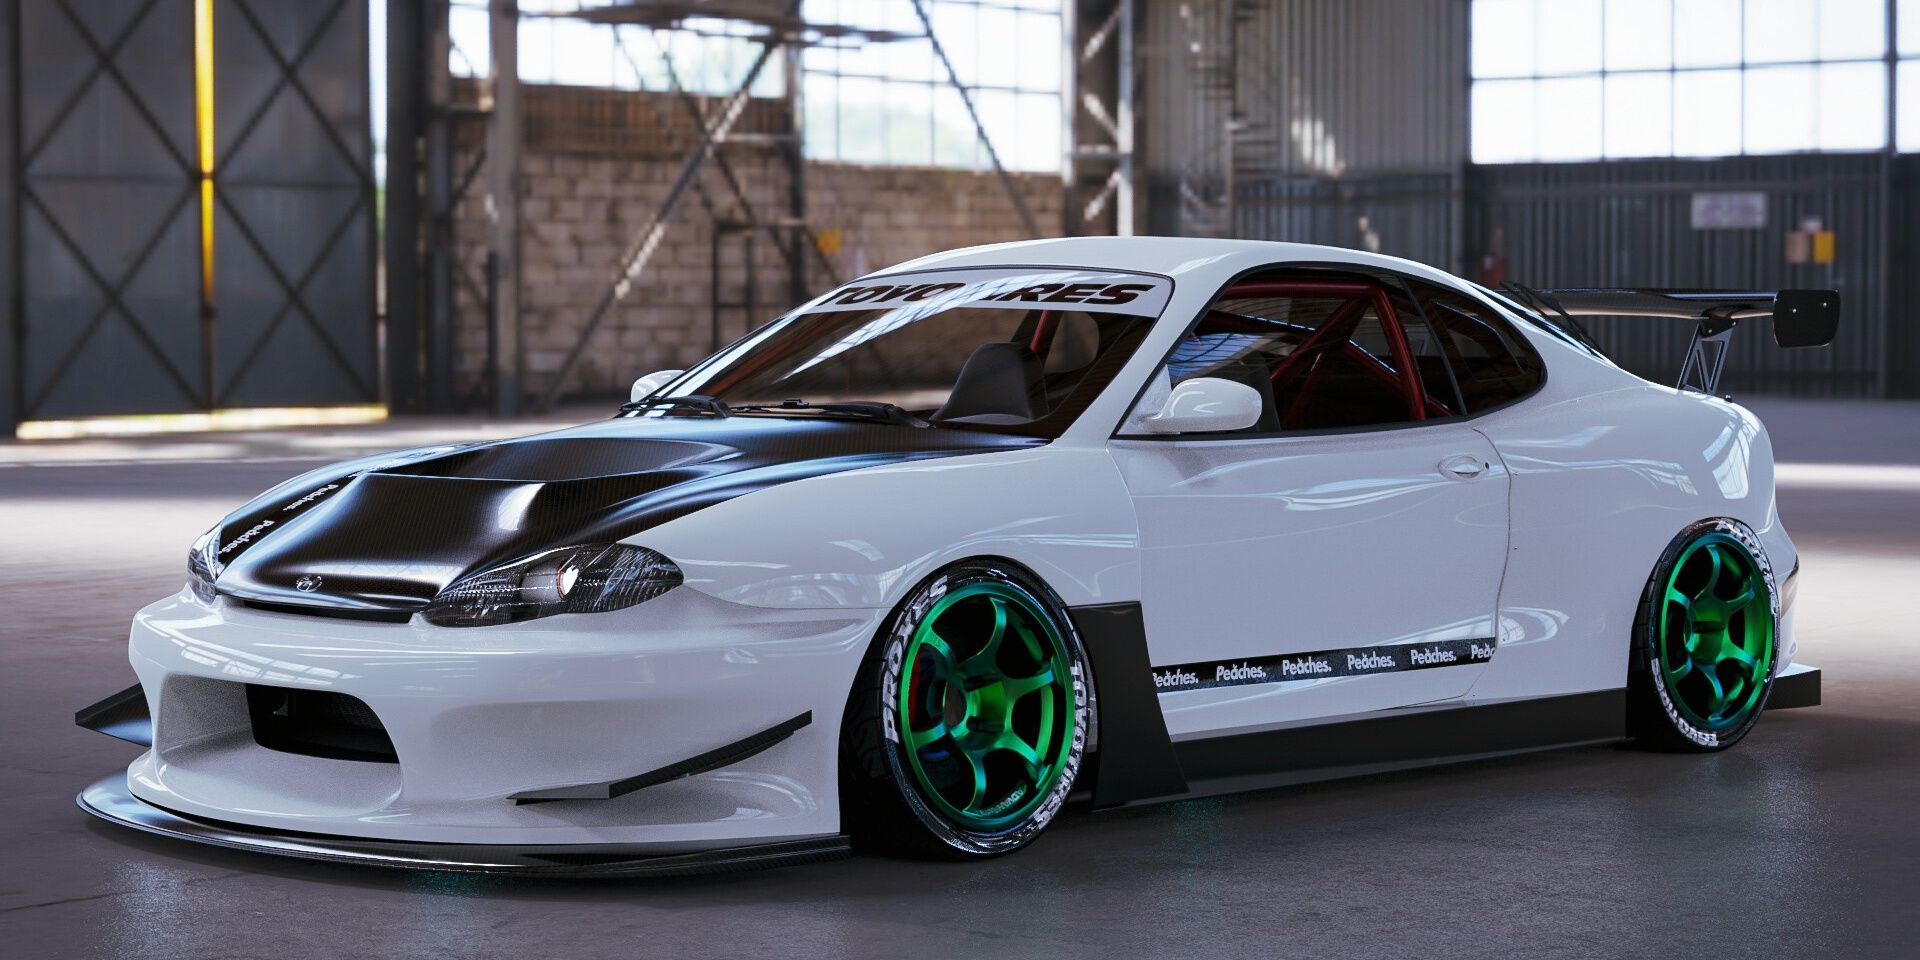 These Cheap Cars Look Insane With Body Kits